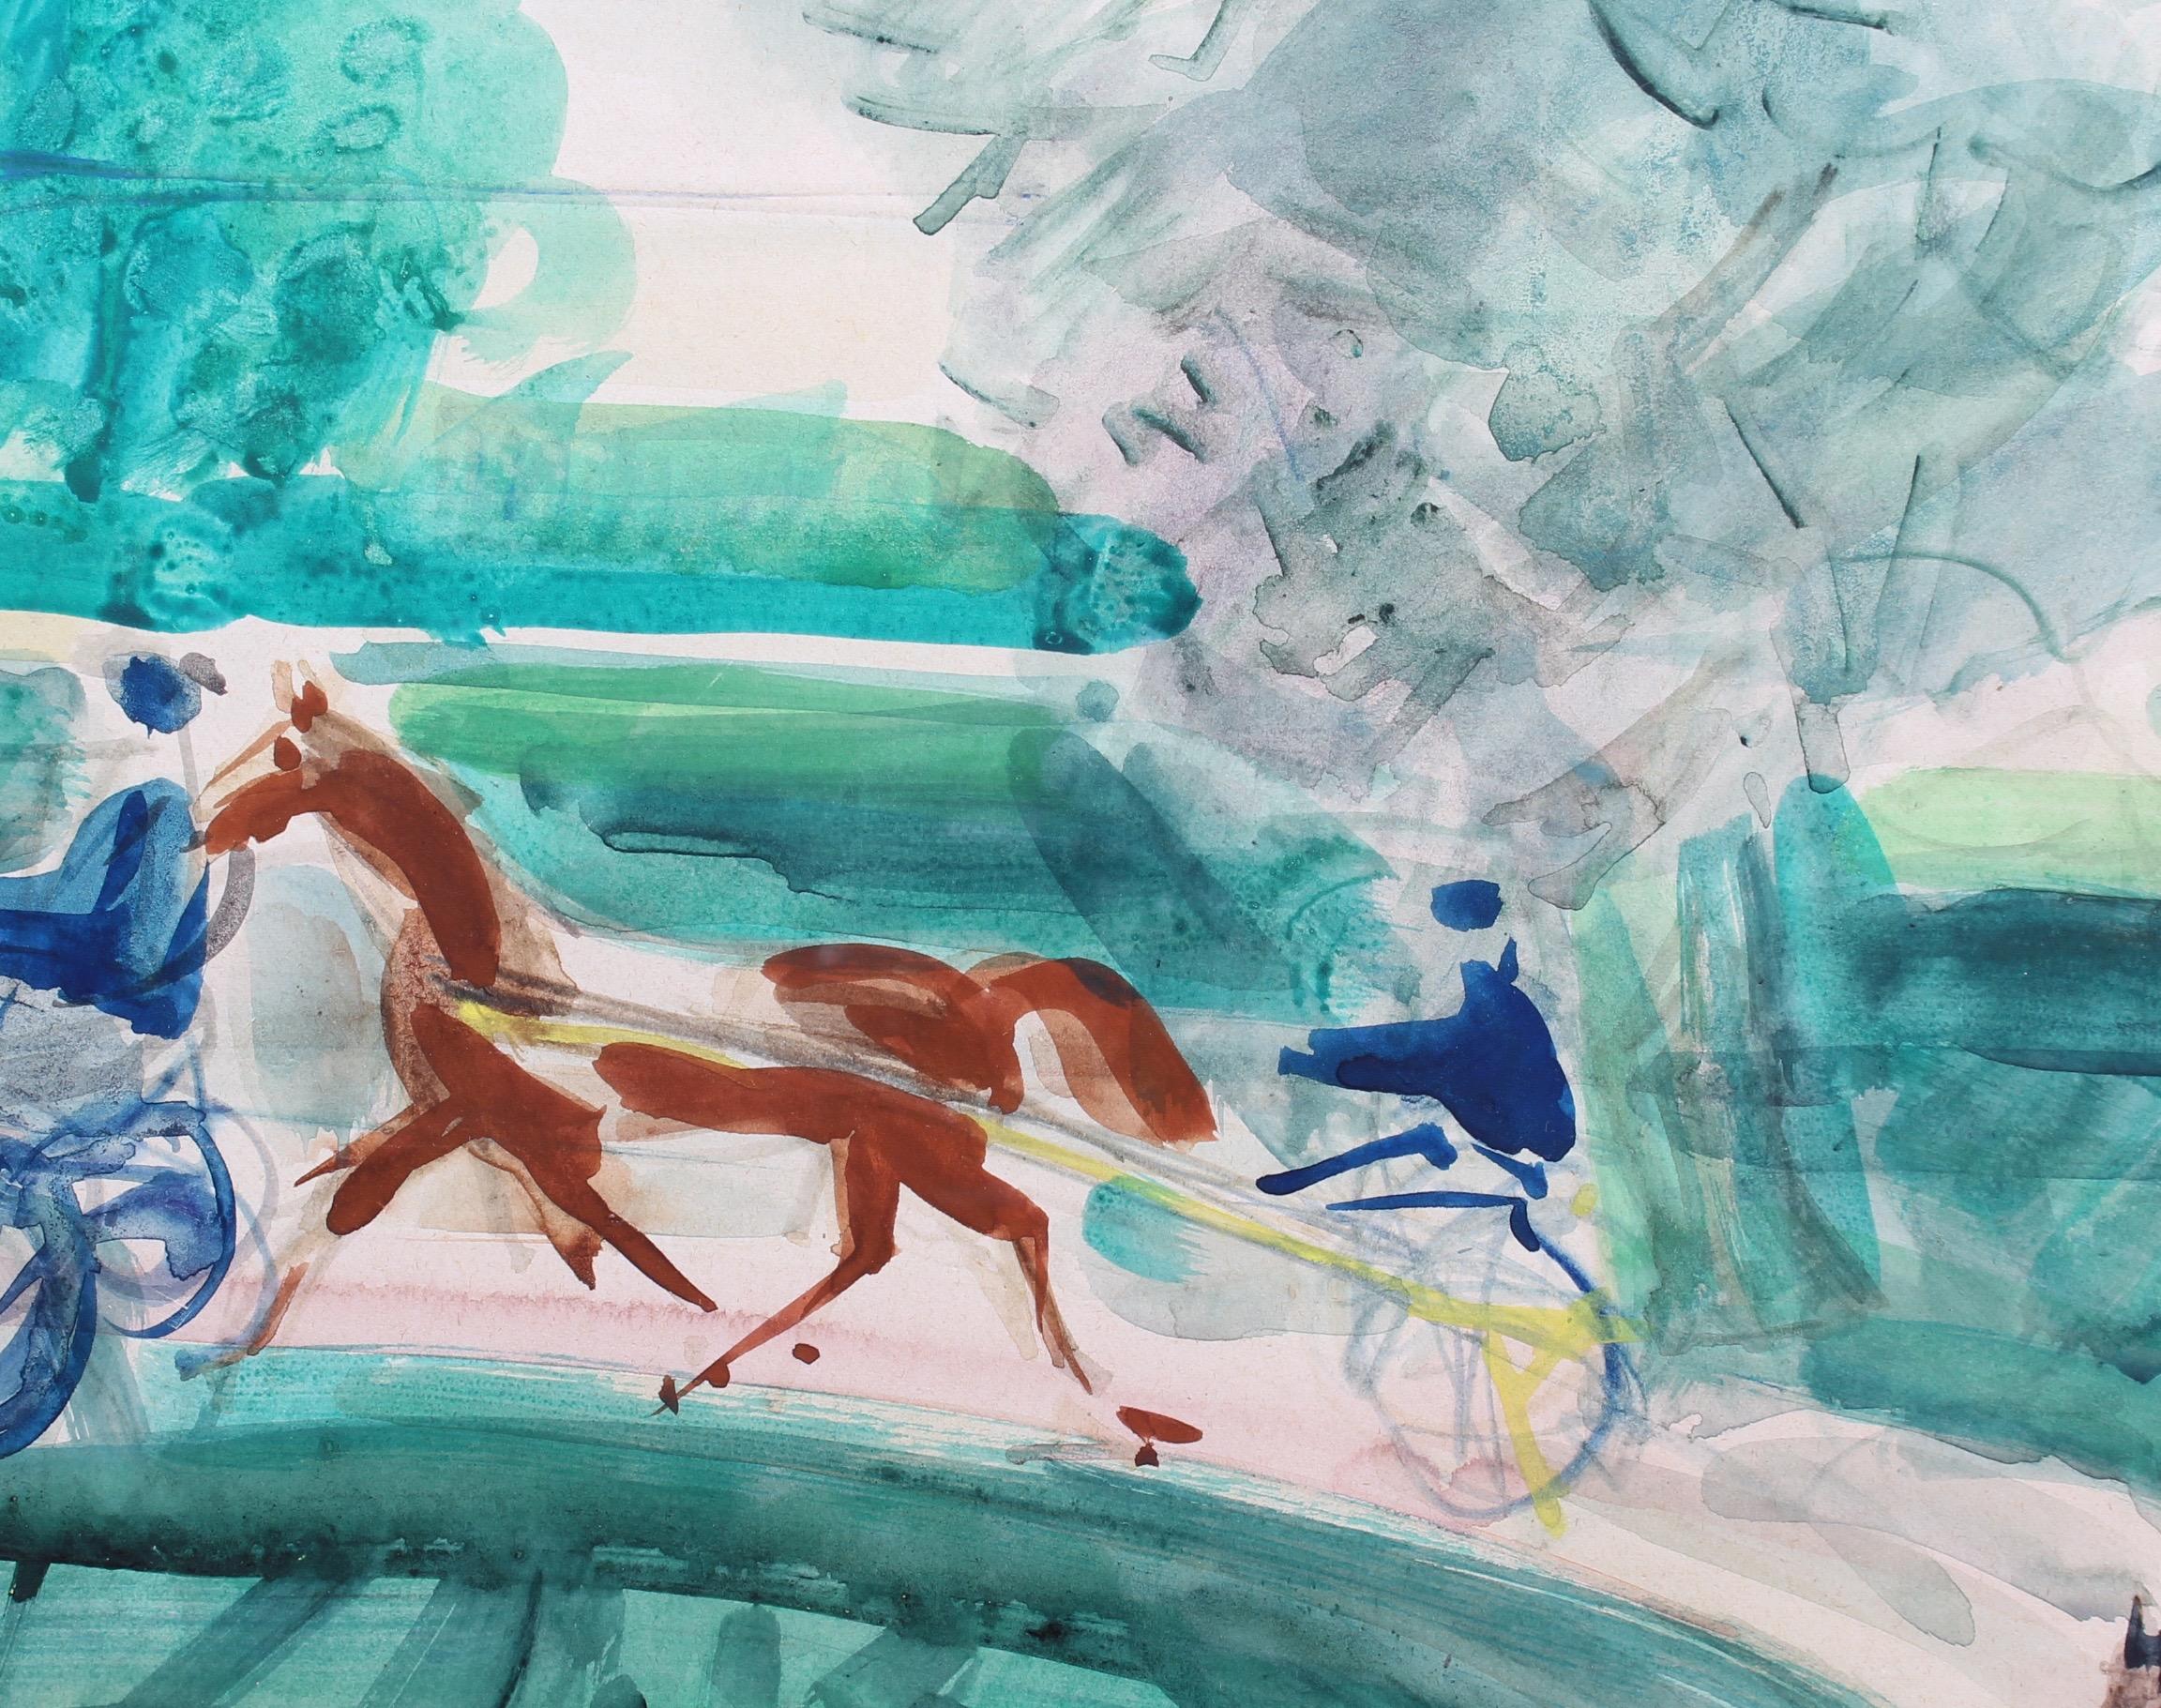 'A Day at the Deauville Racetrack', watercolour on fine paper (circa 1950s), by Pierre Gaillardot (1910 - 2002). Harness racing is an exciting form of horse racing in which the animals run at a specific gait. They usually pull a two-wheeled cart